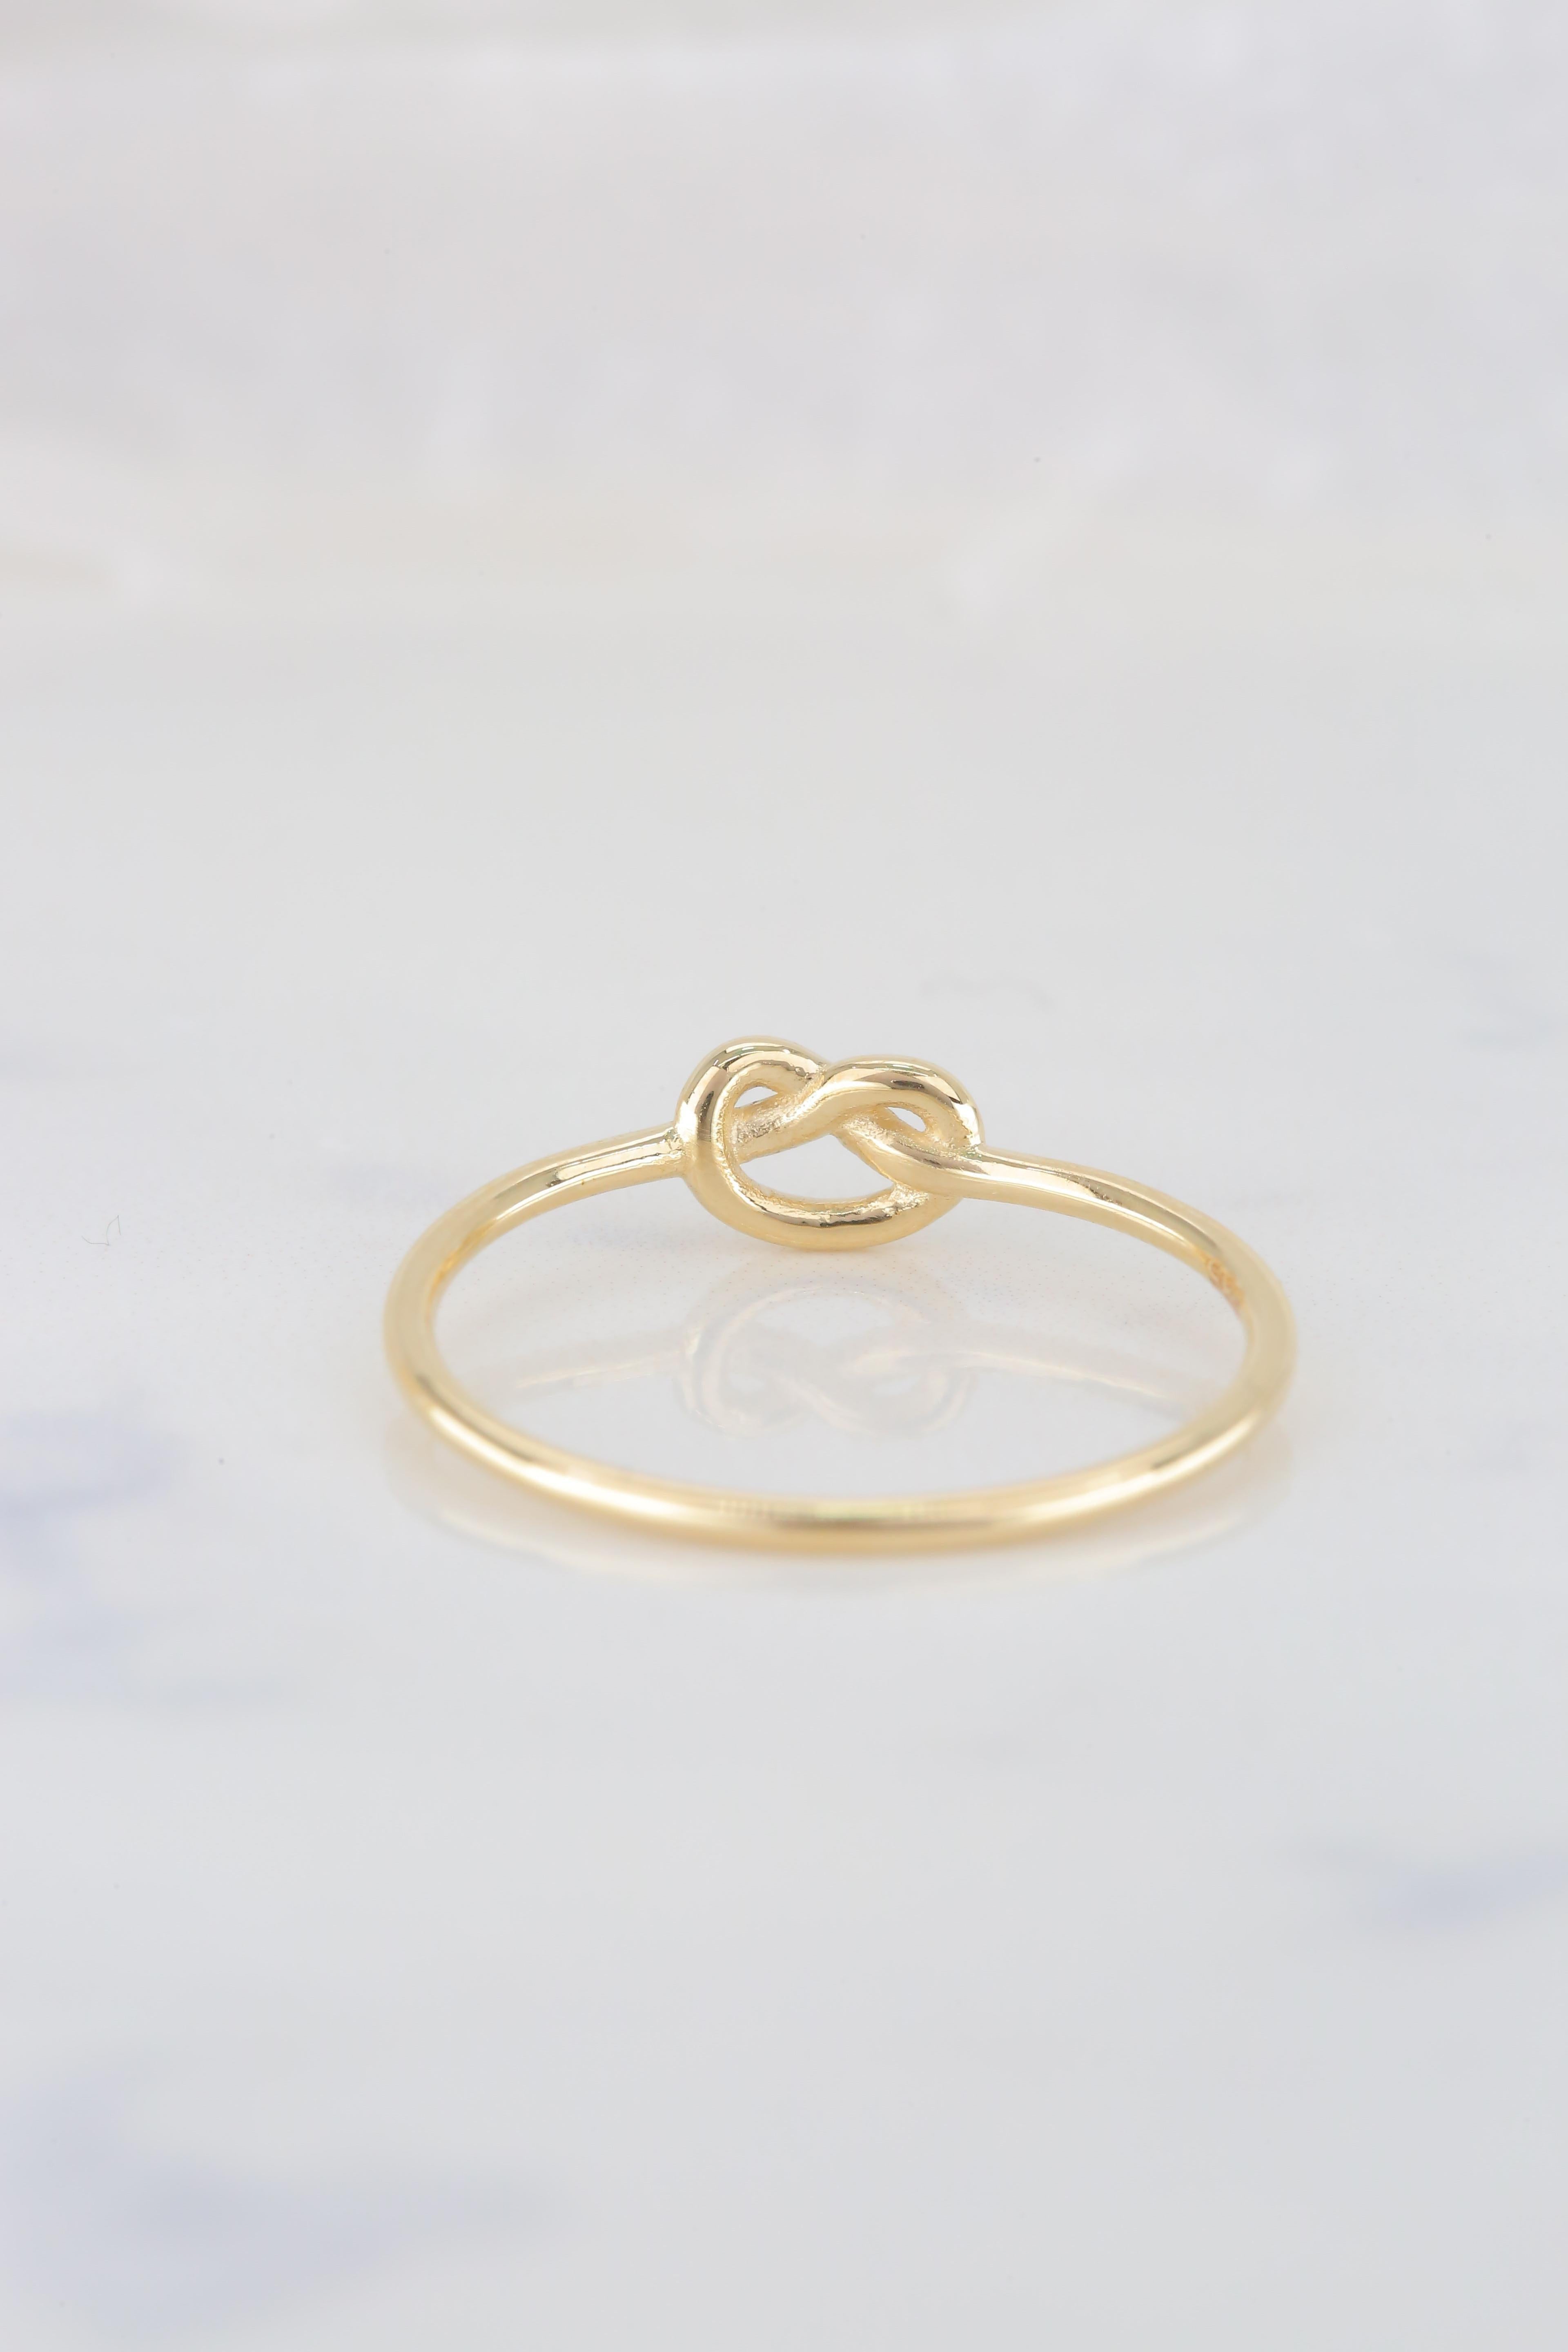 For Sale:  Gold Knot Ring, 14k Solid Gold, Dainty Ring, Minimalist Style Ring 6